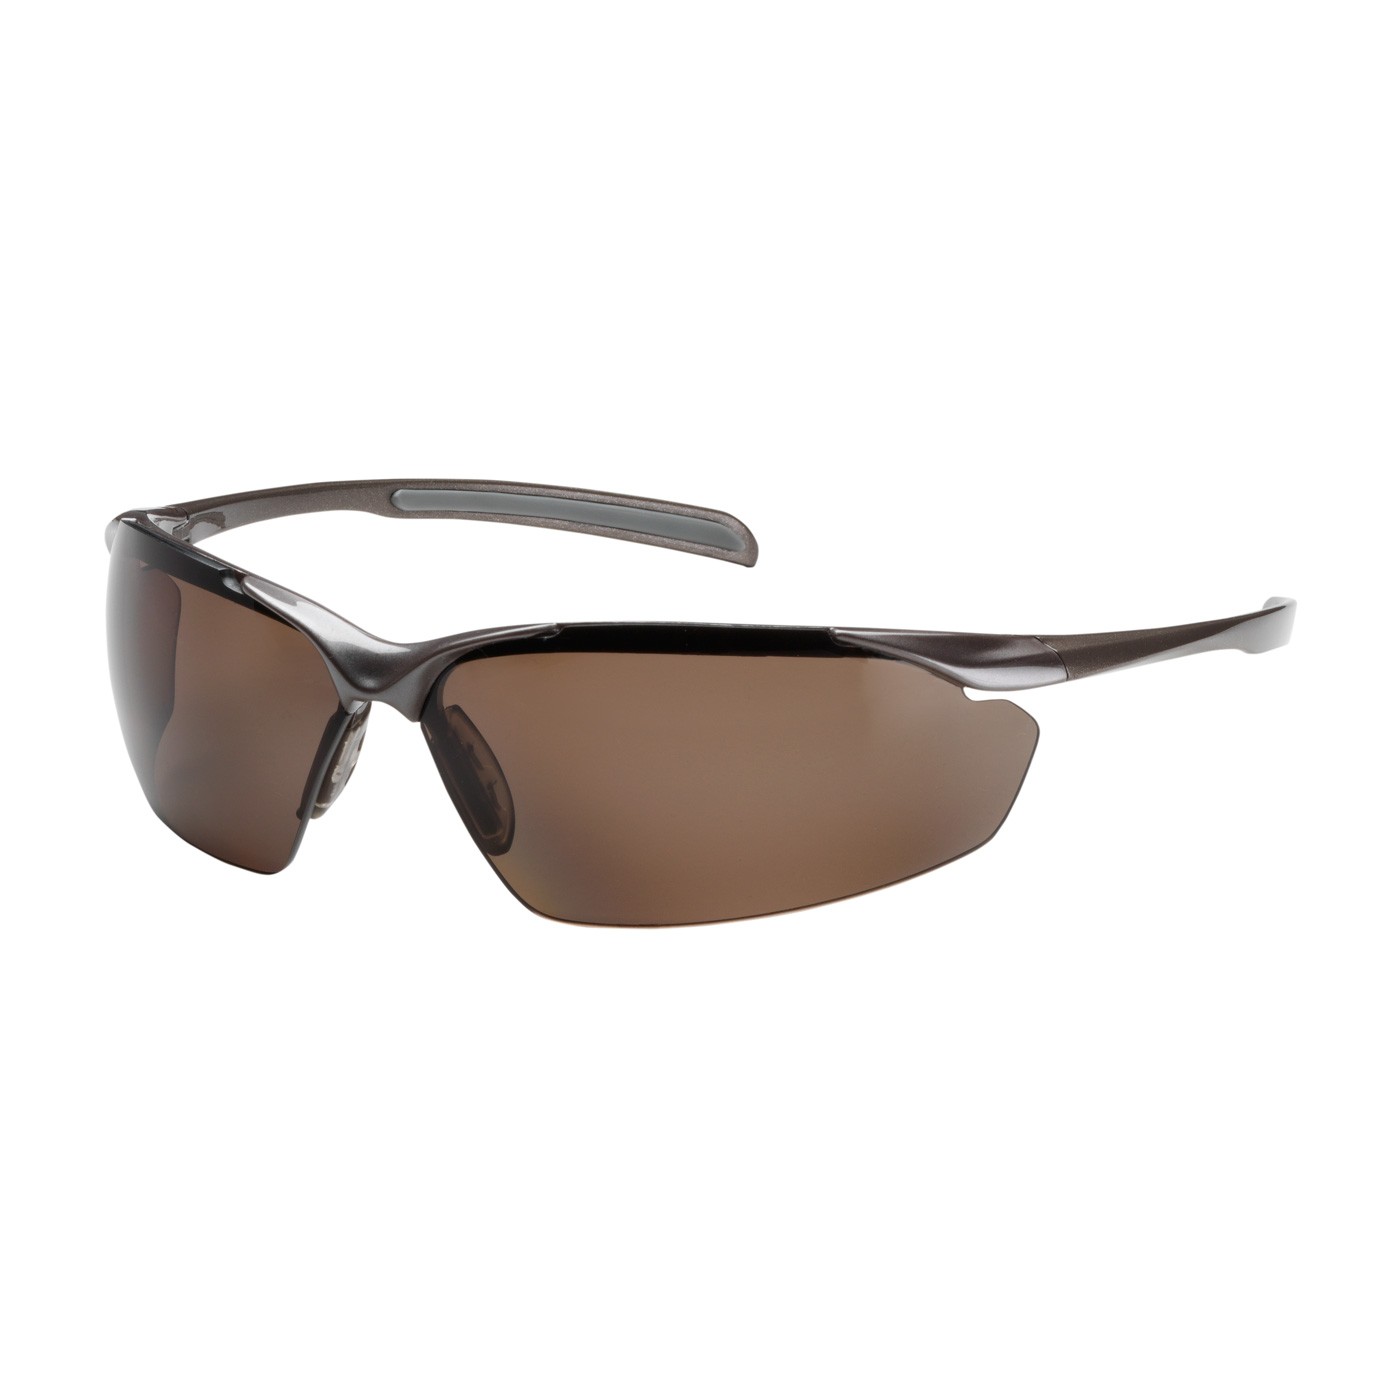 Commander™ Semi-Rimless Safety Glasses with Gloss Bronze Frame, Polarized Brown Lens and Anti-Scratch Coating  (#250-33-1042)